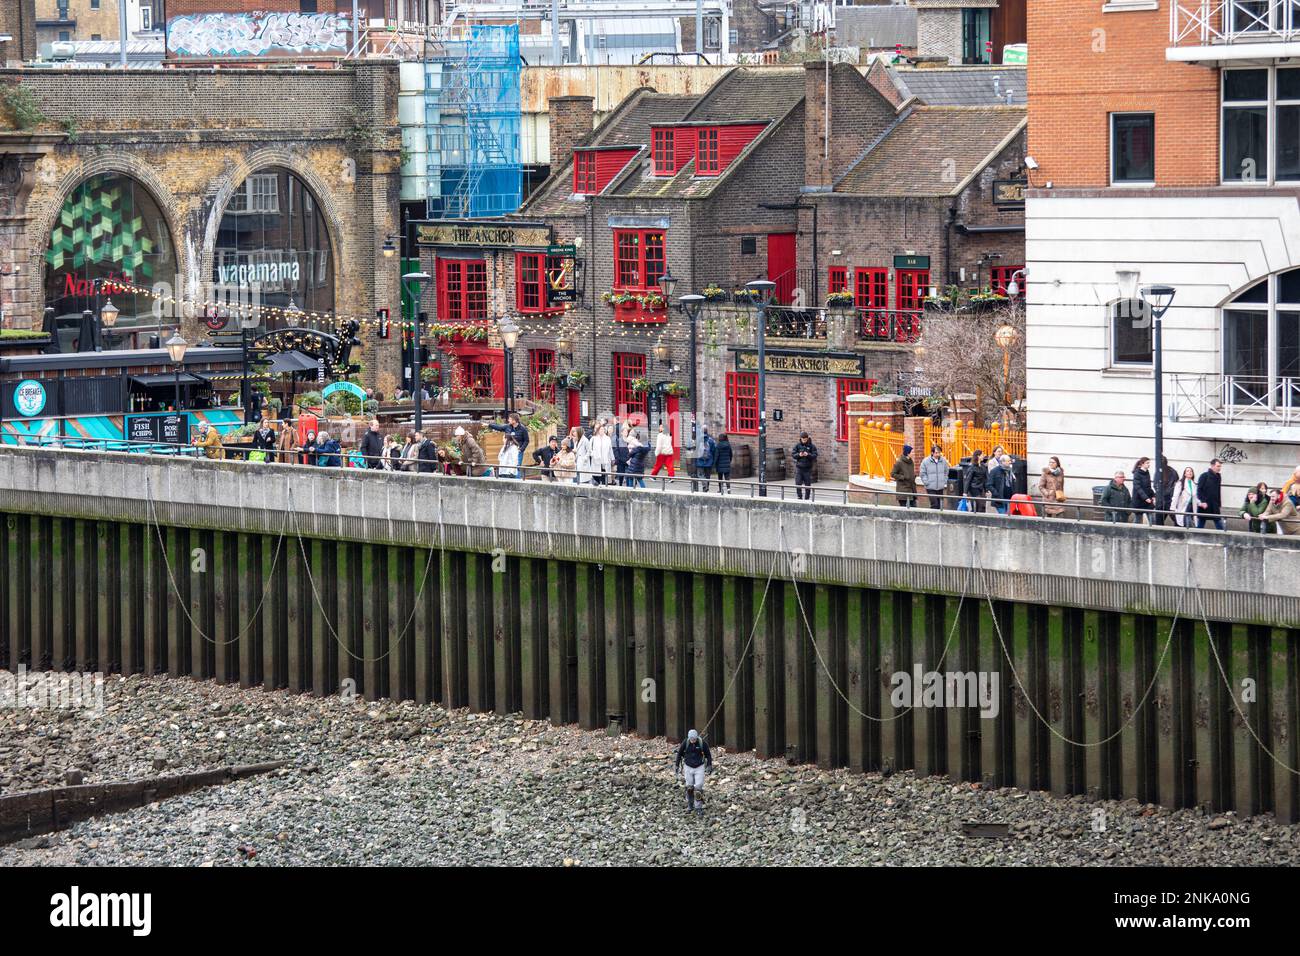 Anchor Bankside Pub and rocky riverbed of River Thames during low tide in Southwark district of London, England Stock Photo